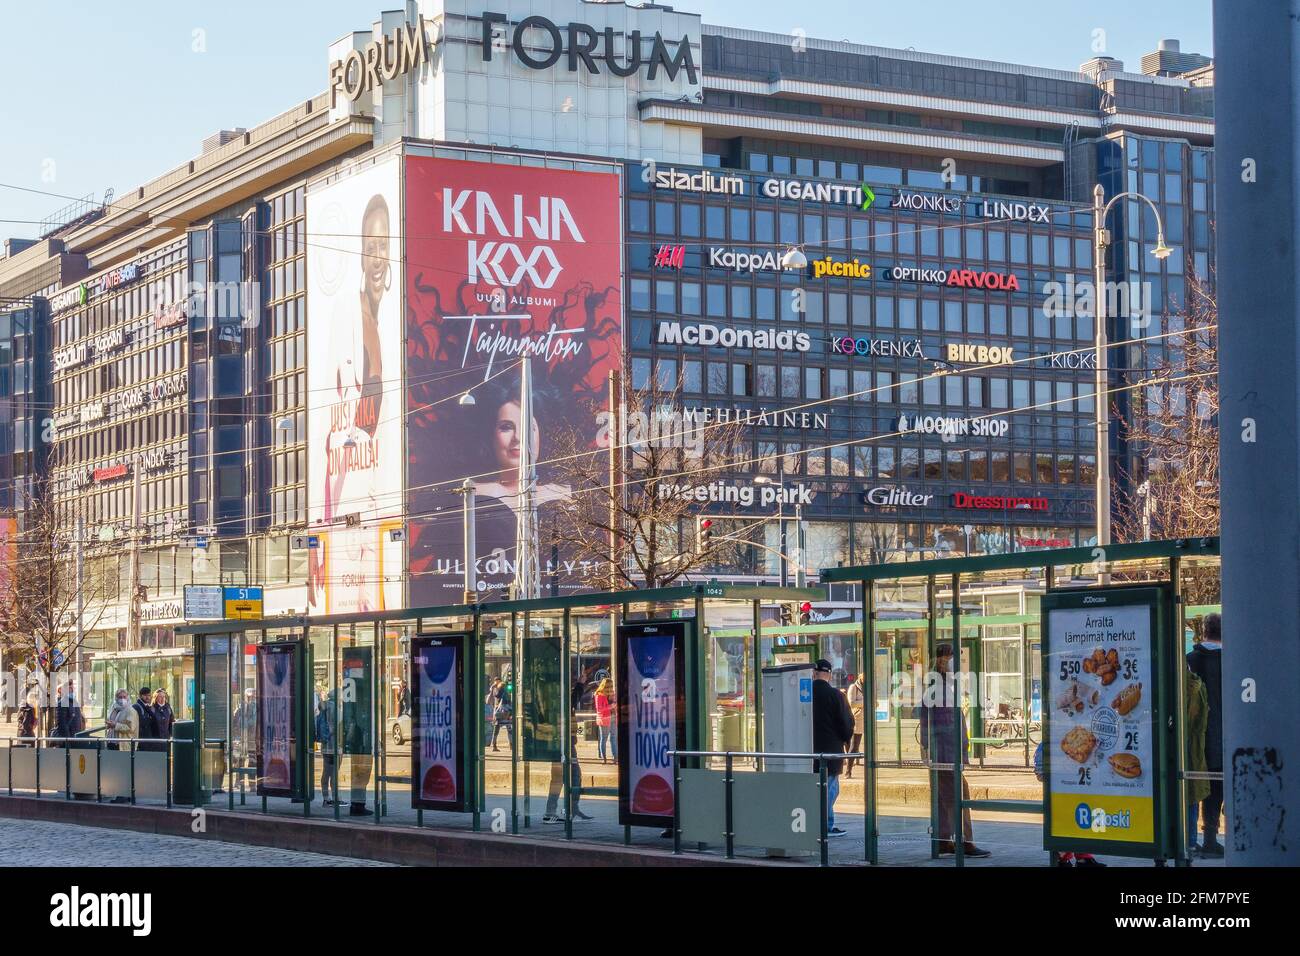 Lasipalatsi (glass palace) tram stop on Mannerheimintie street with Forum  shopping mall in the background in Helsinki Finland Stock Photo - Alamy